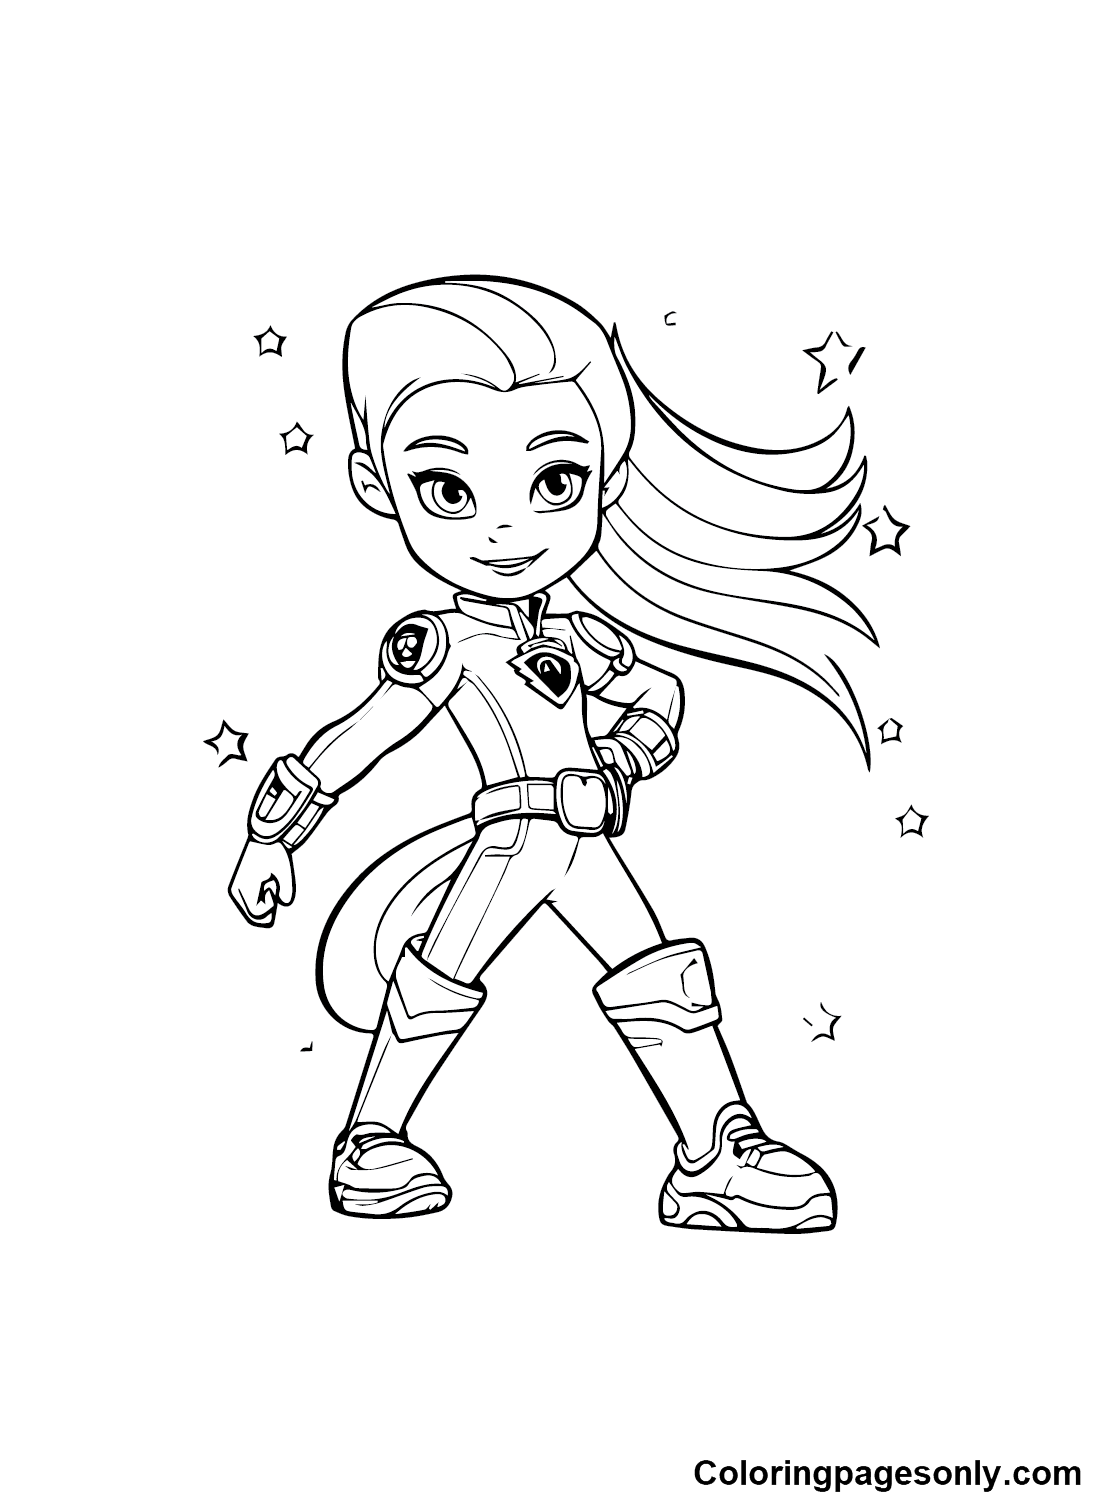 Amazing Rainbow Rangers Coloring Page